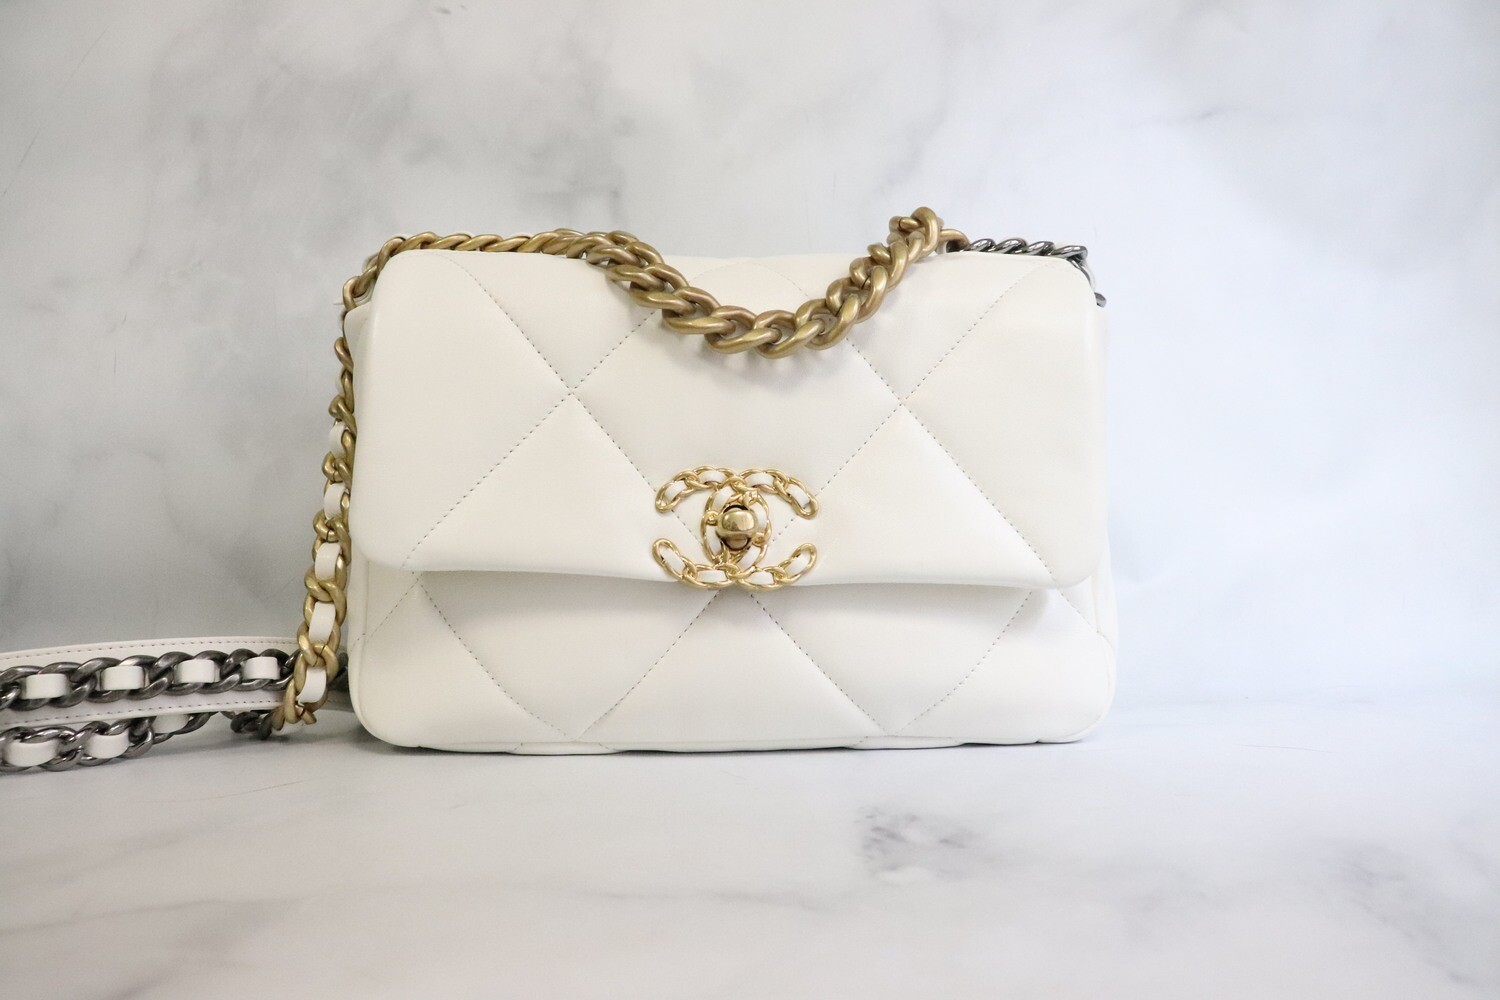 Chanel 19 Medium (Small), White Lambskin Leather, Mixed Hardware, New in Box